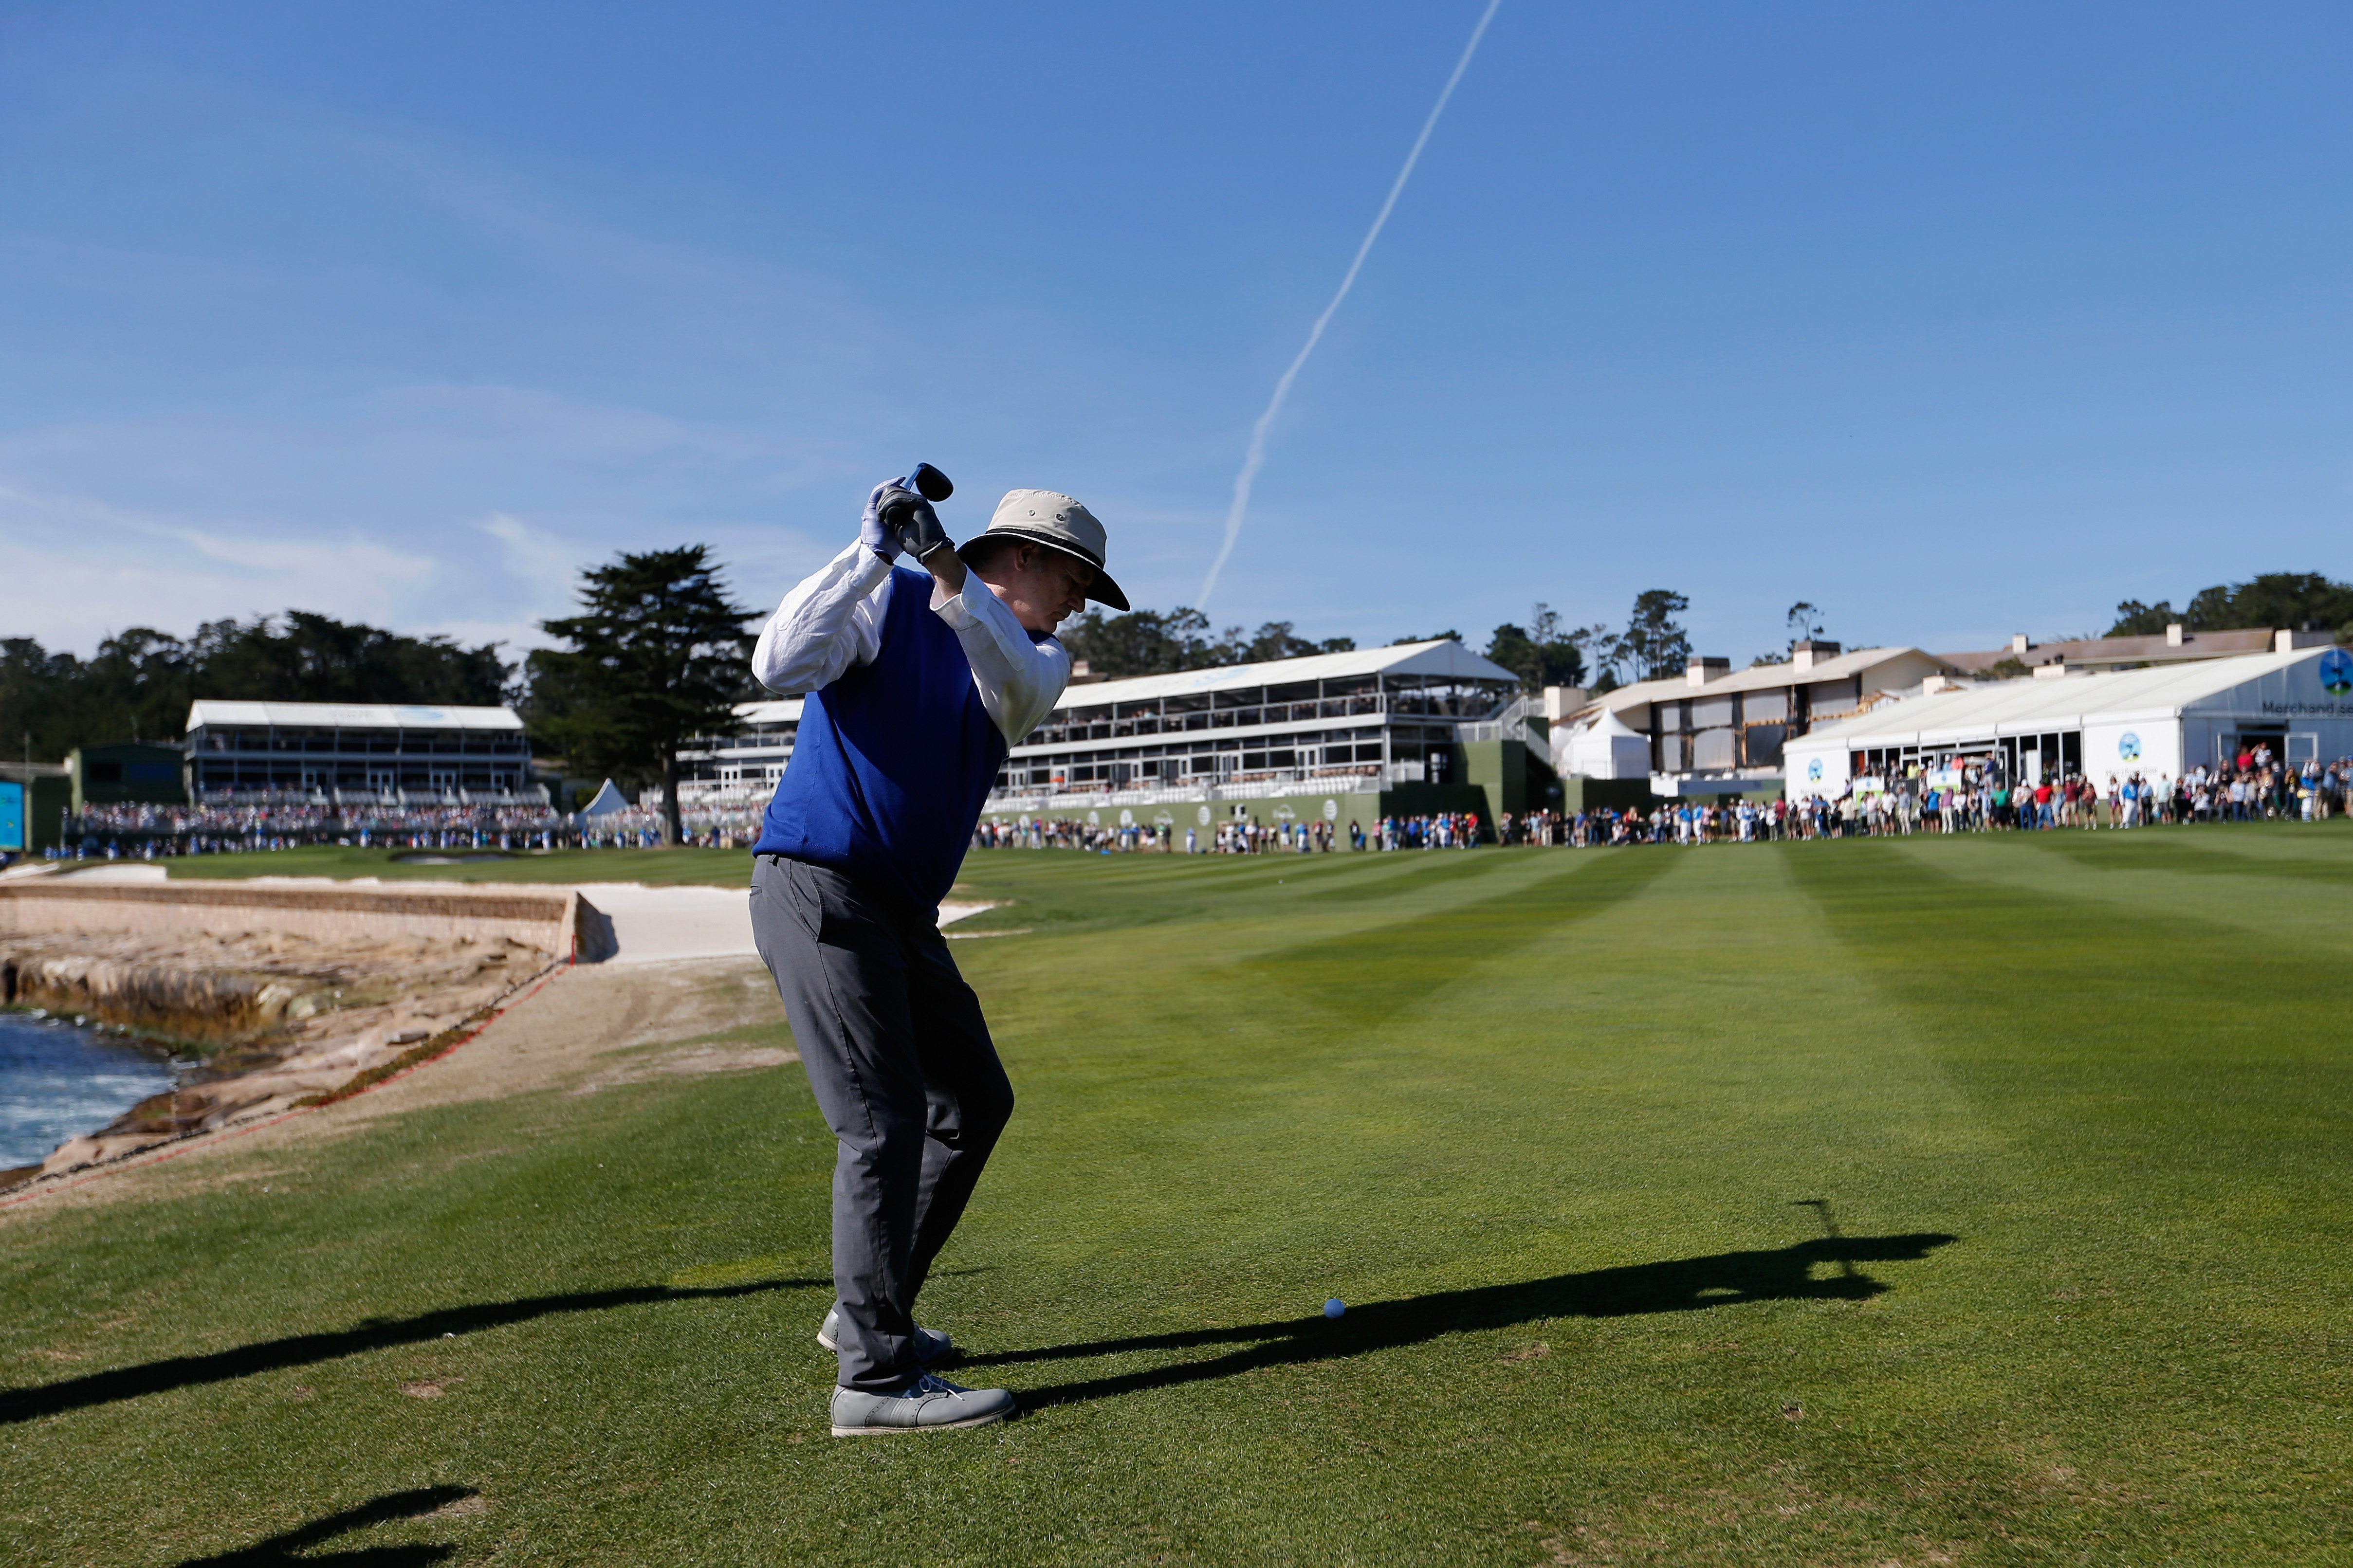 The Best Celebrities Playing in the 2018 ATandT Pebble Beach Pro-Am